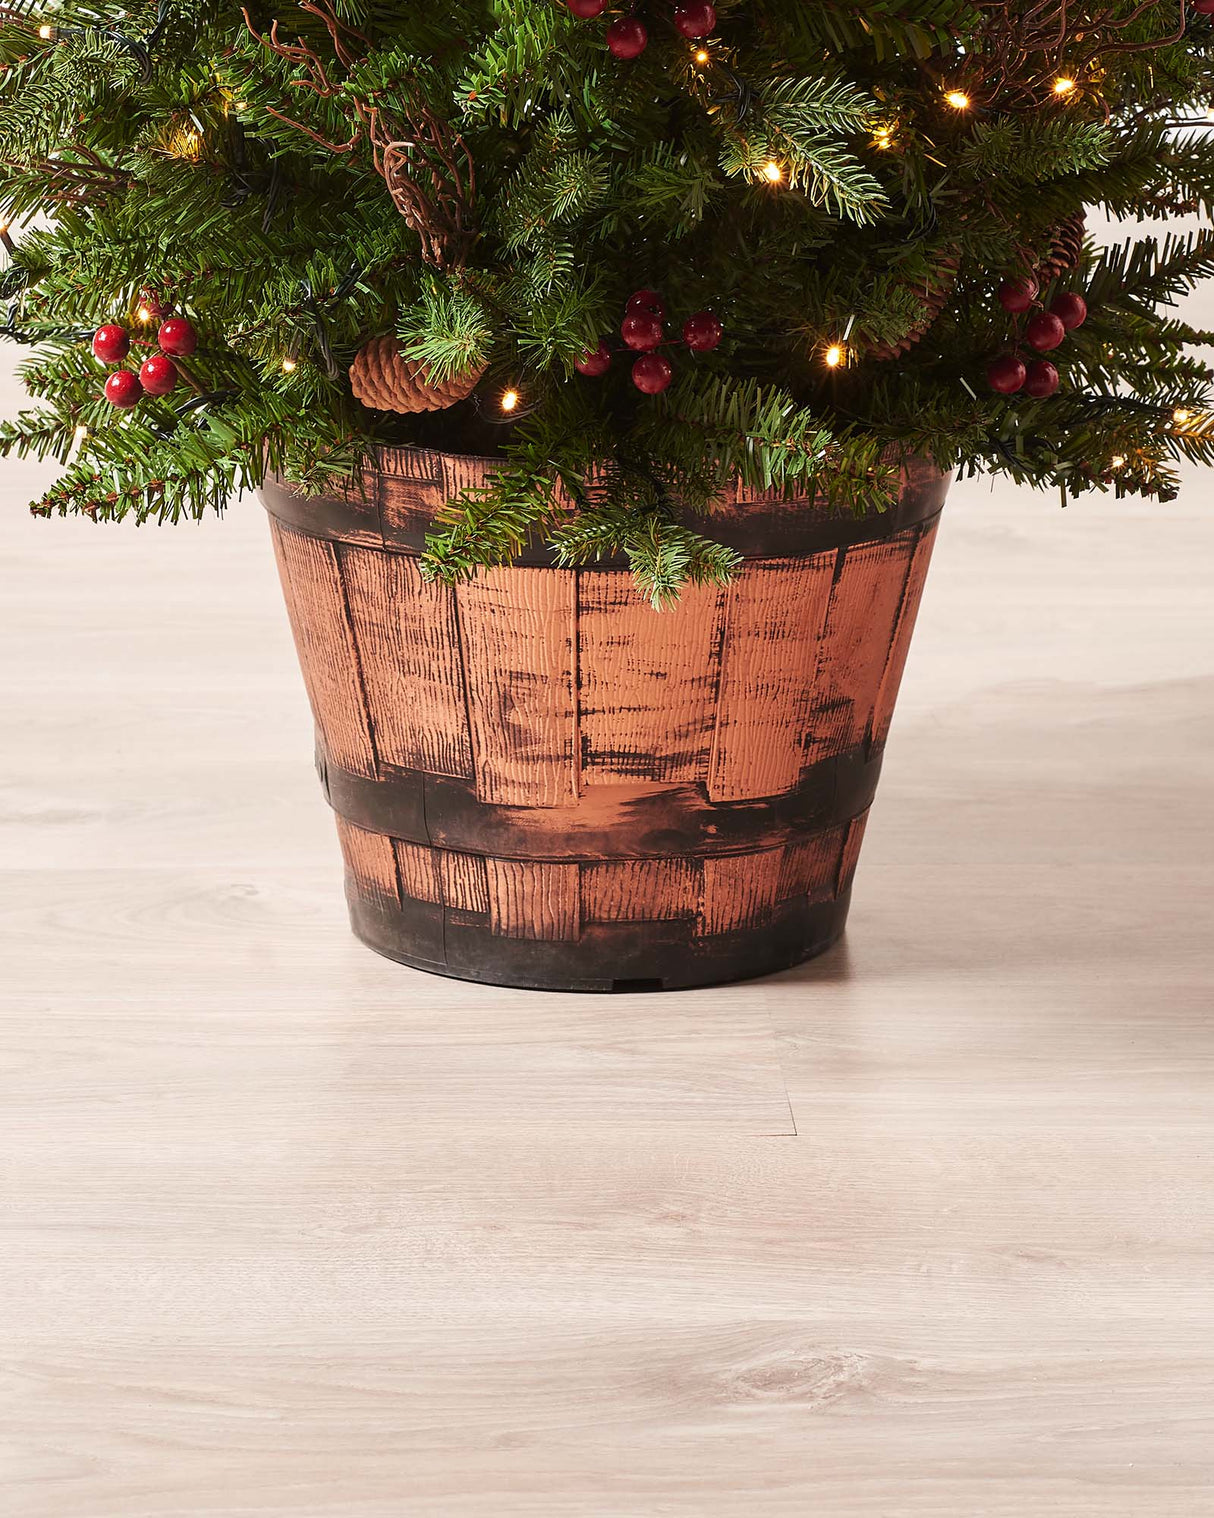 Pre-Lit Pines & Berries Potted Christmas Tree, 4.5 ft